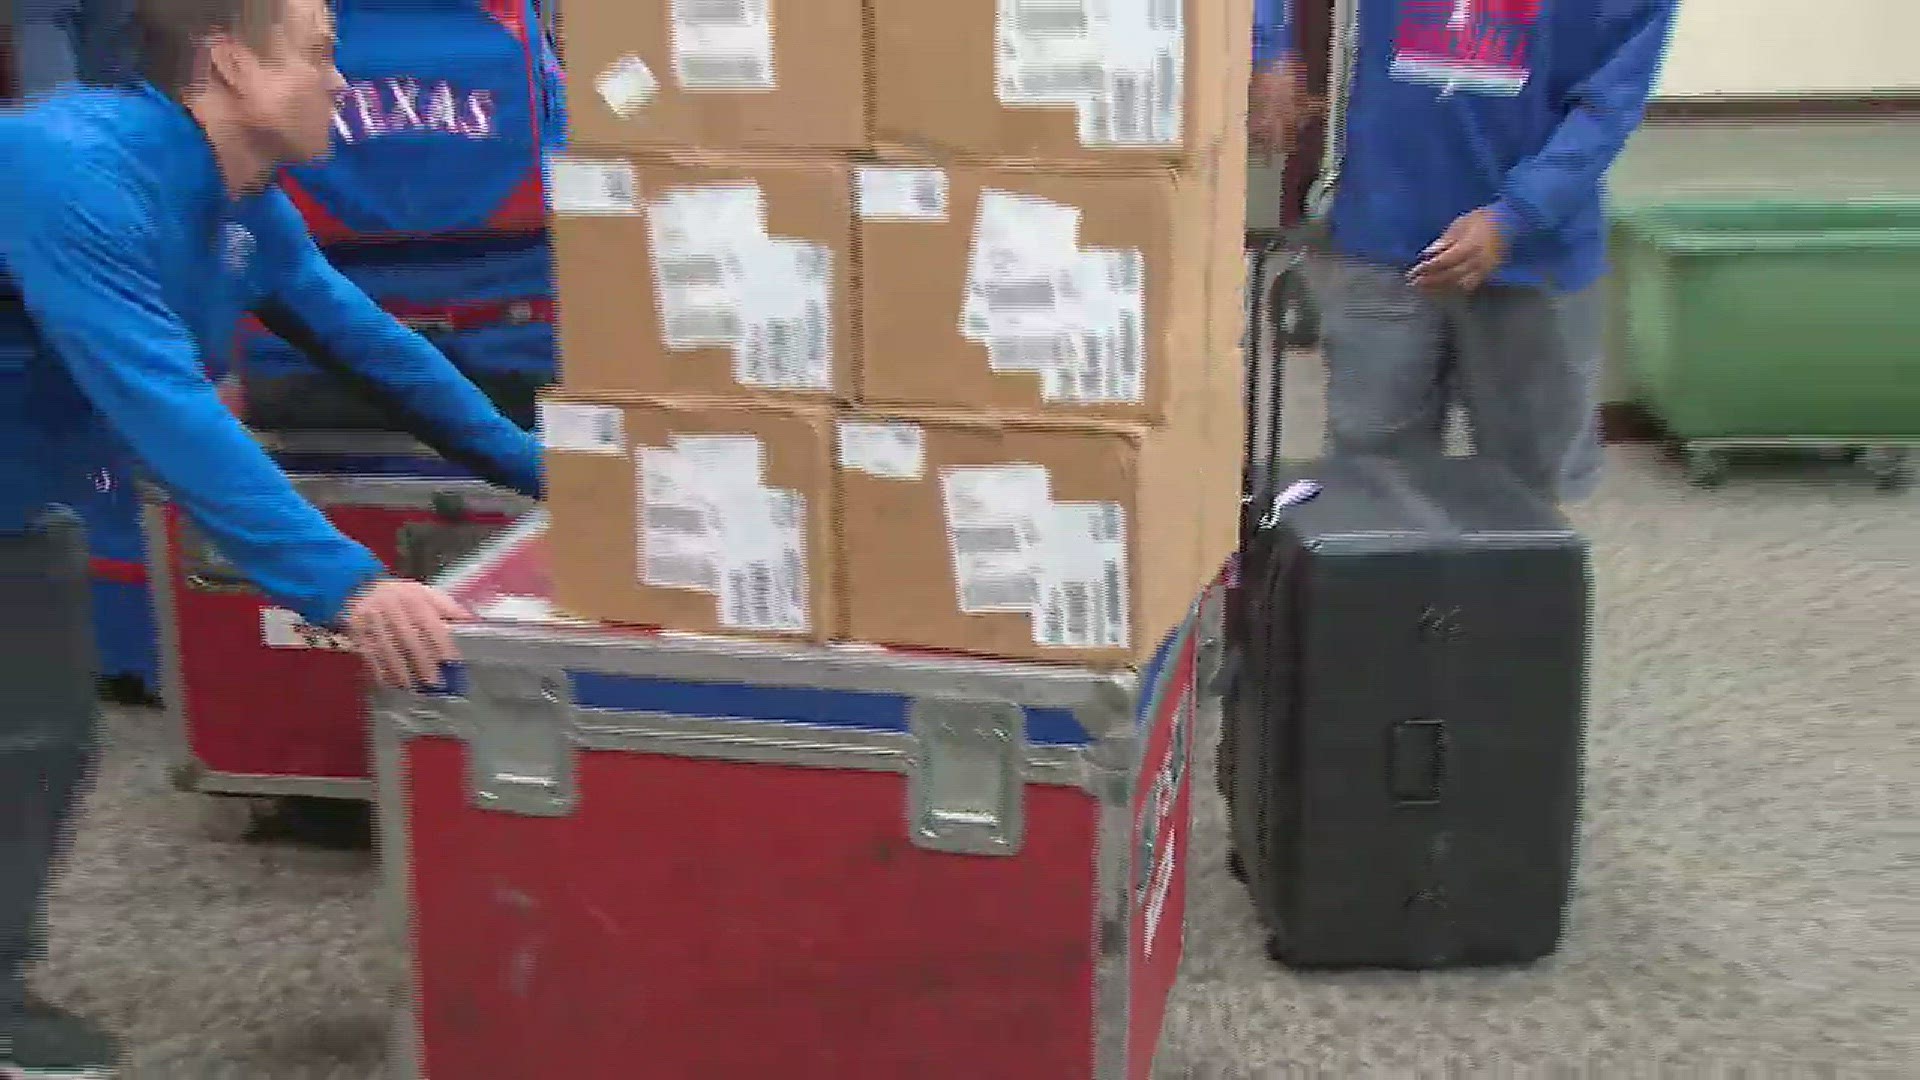 It's almost Spring Training time -- 12 days until pitchers and catchers report, and only slightly more than that until real spring training begins.  Today, the Rangers truck full of equipment took off from Globe Life Park, to head to Arizona.